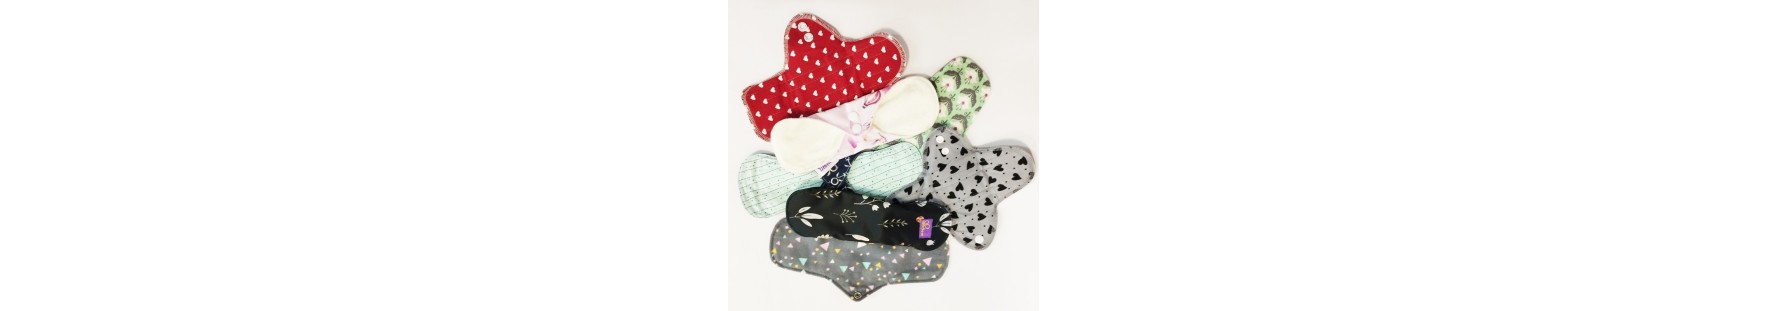 Reusable cloth pads in cotton, bamboo or flannel cotton